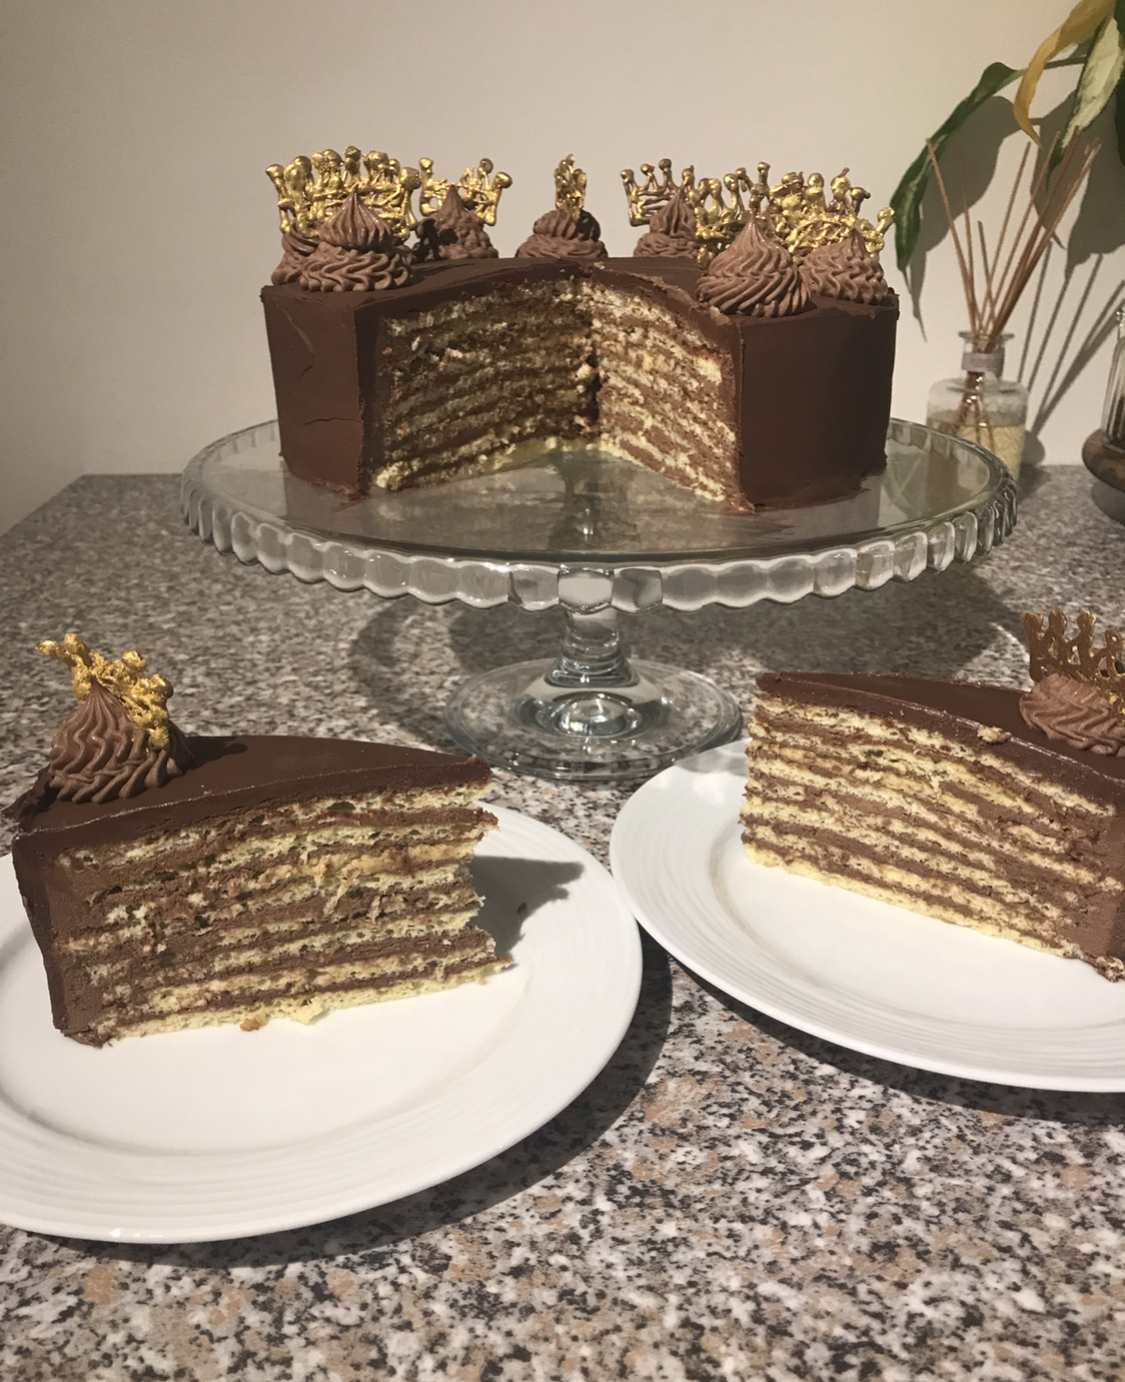 Torte vs. Cake: What is a Torte and What is a Cake? What's the Difference?  - The Kitchen Community